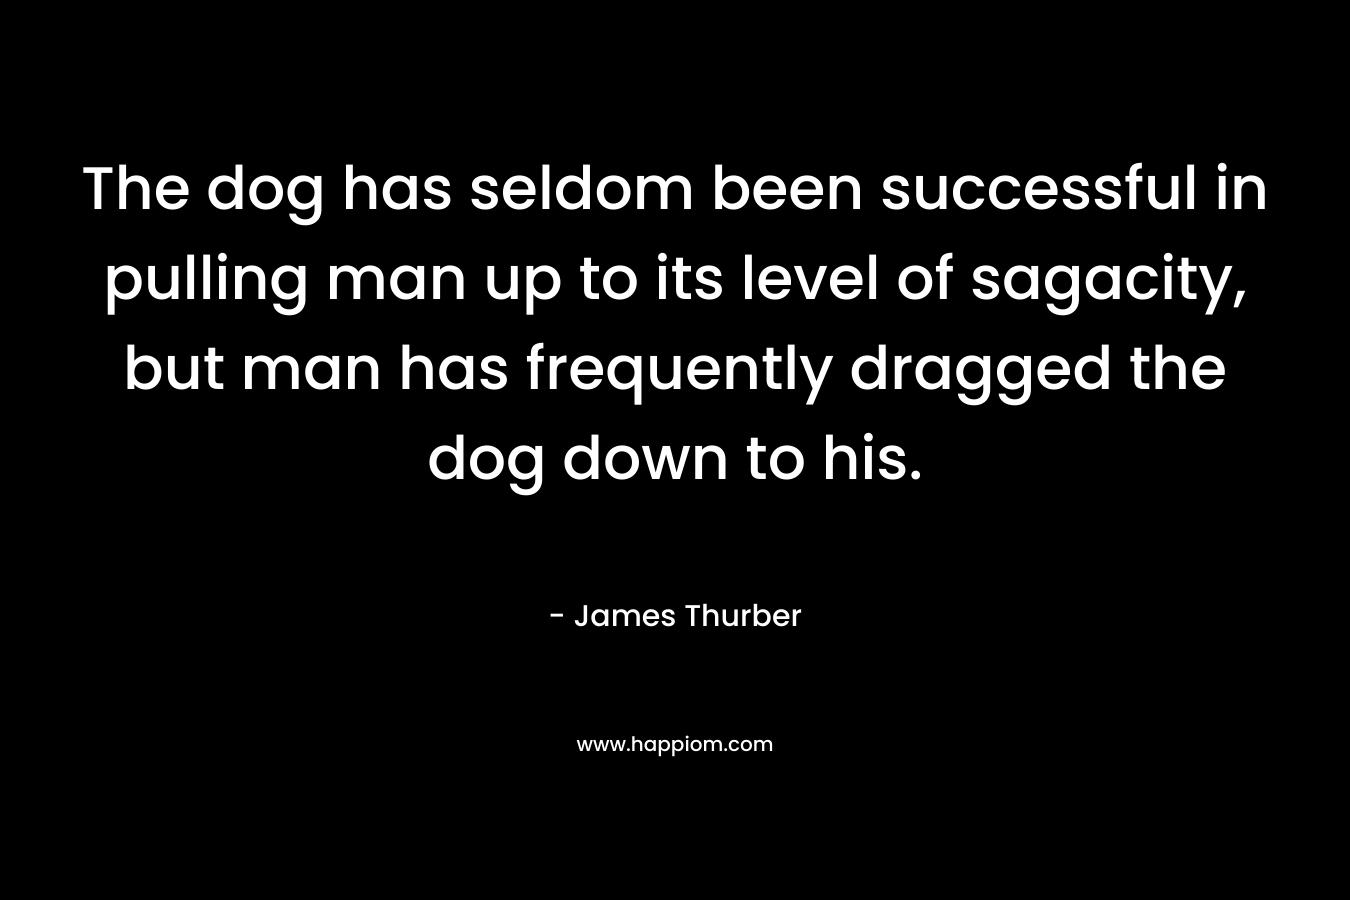 The dog has seldom been successful in pulling man up to its level of sagacity, but man has frequently dragged the dog down to his.